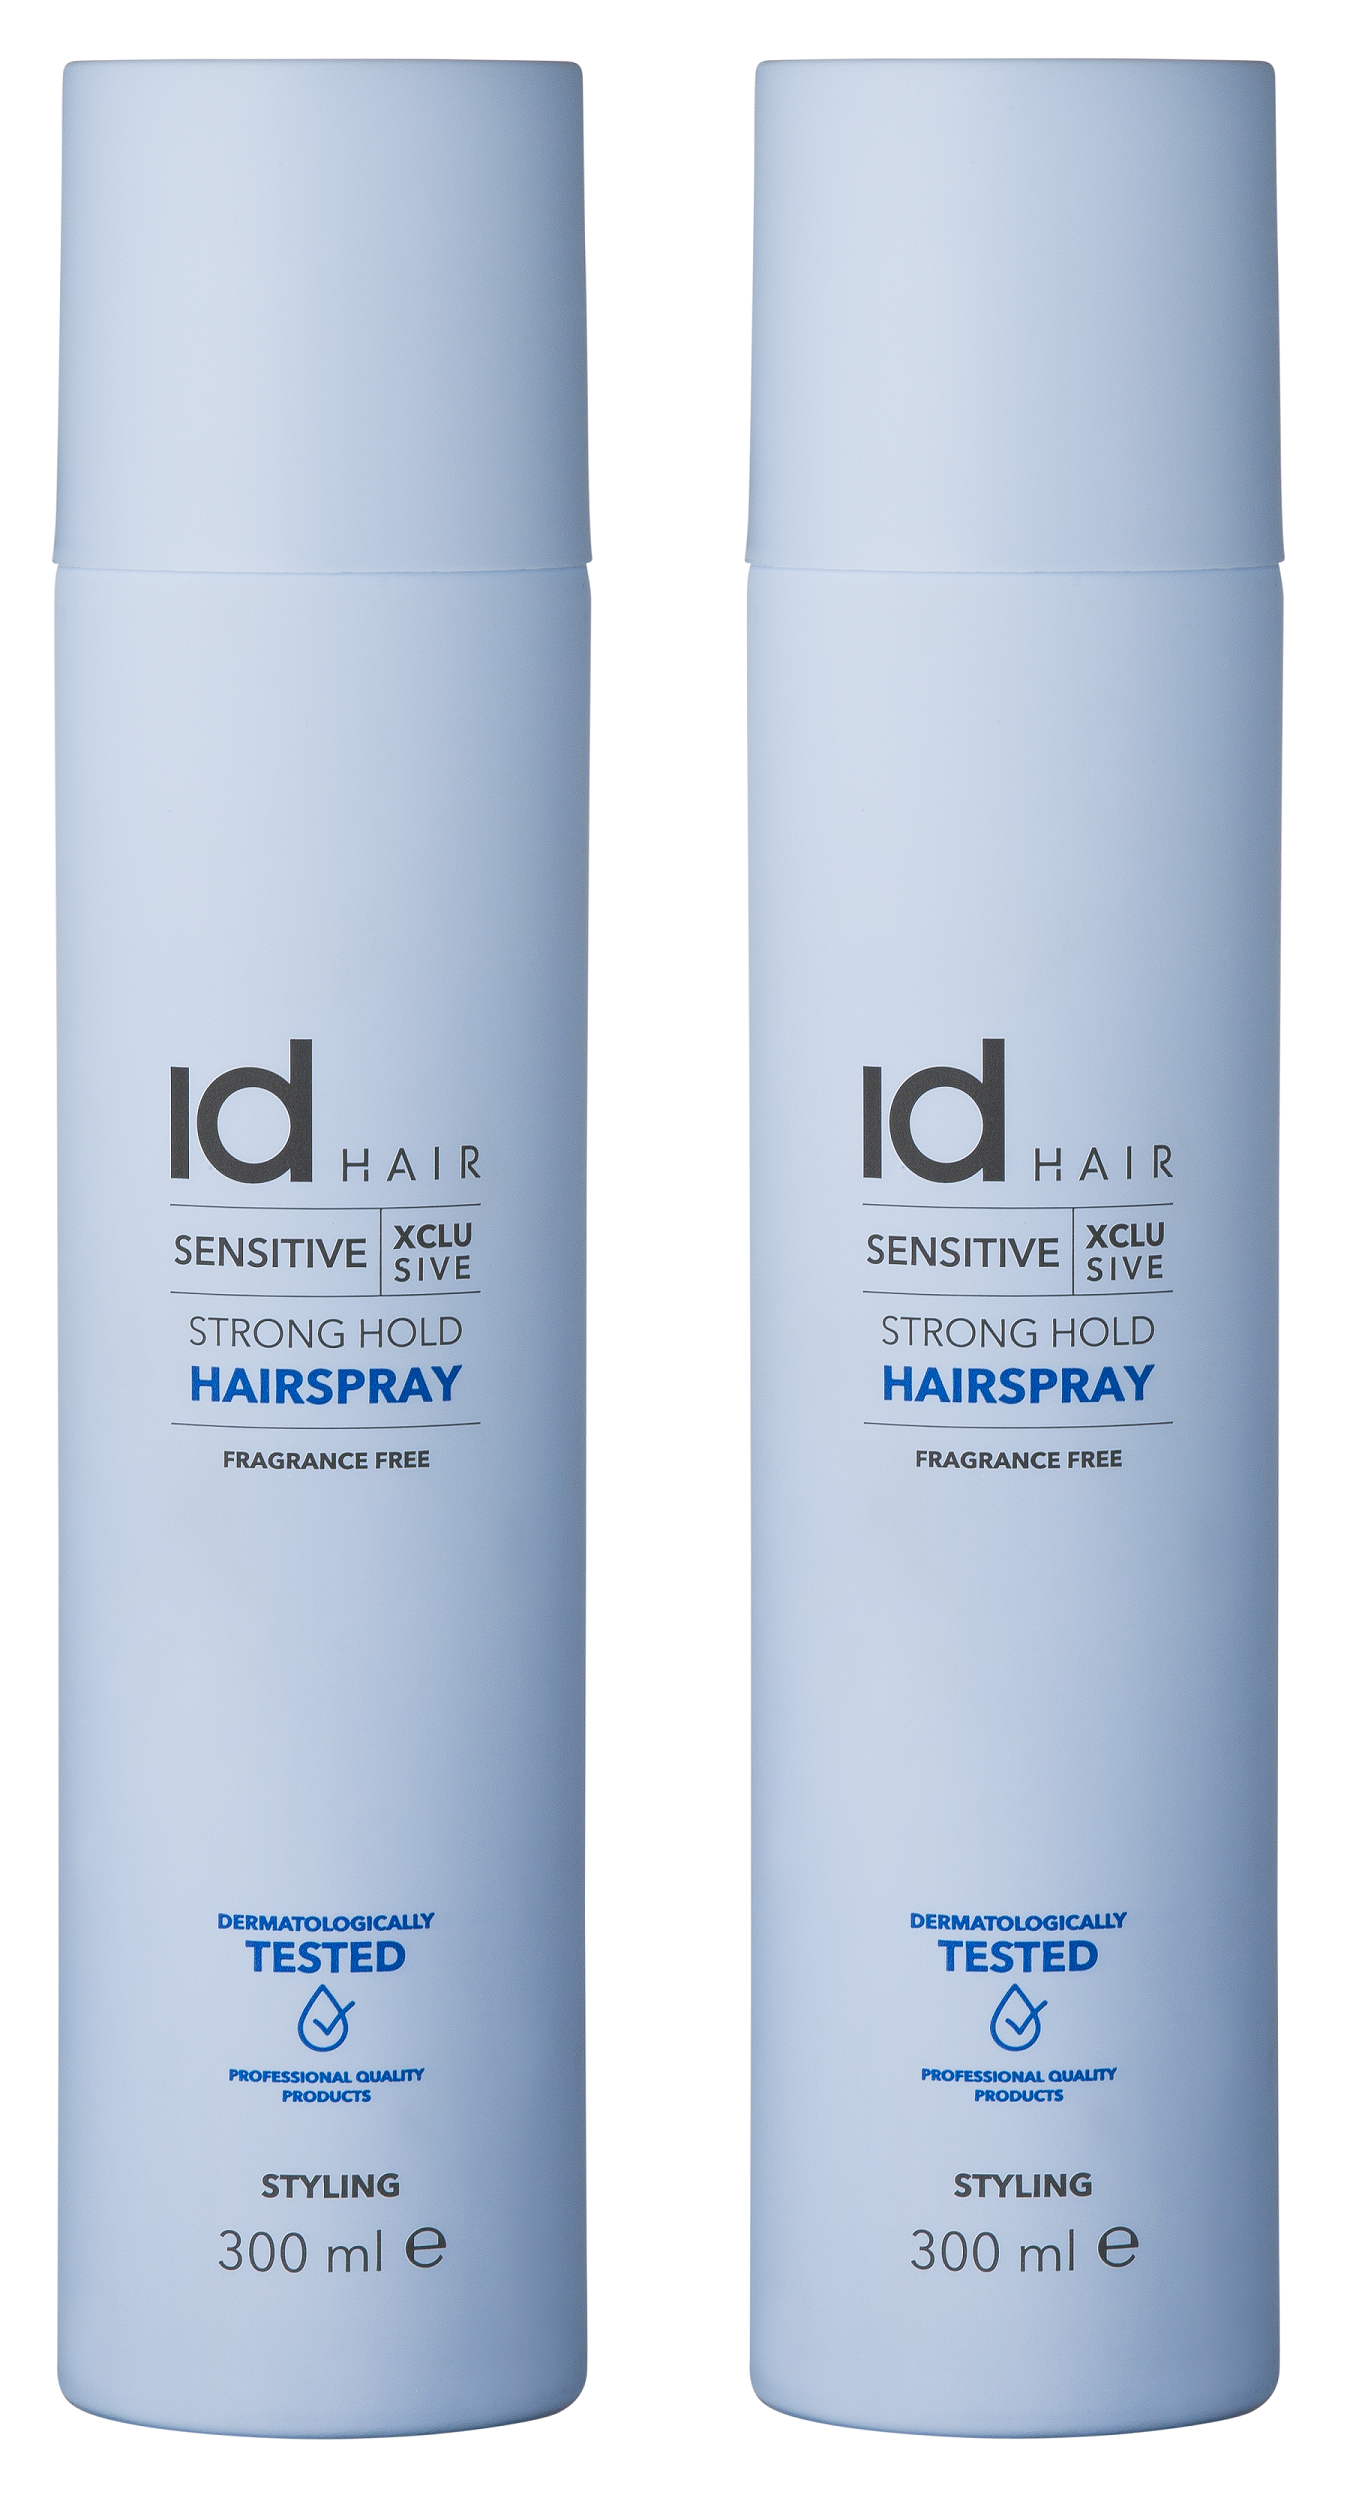 IdHAIR - 2 x Sensitive Xclusive Strong Hold Hairspray 300 ml